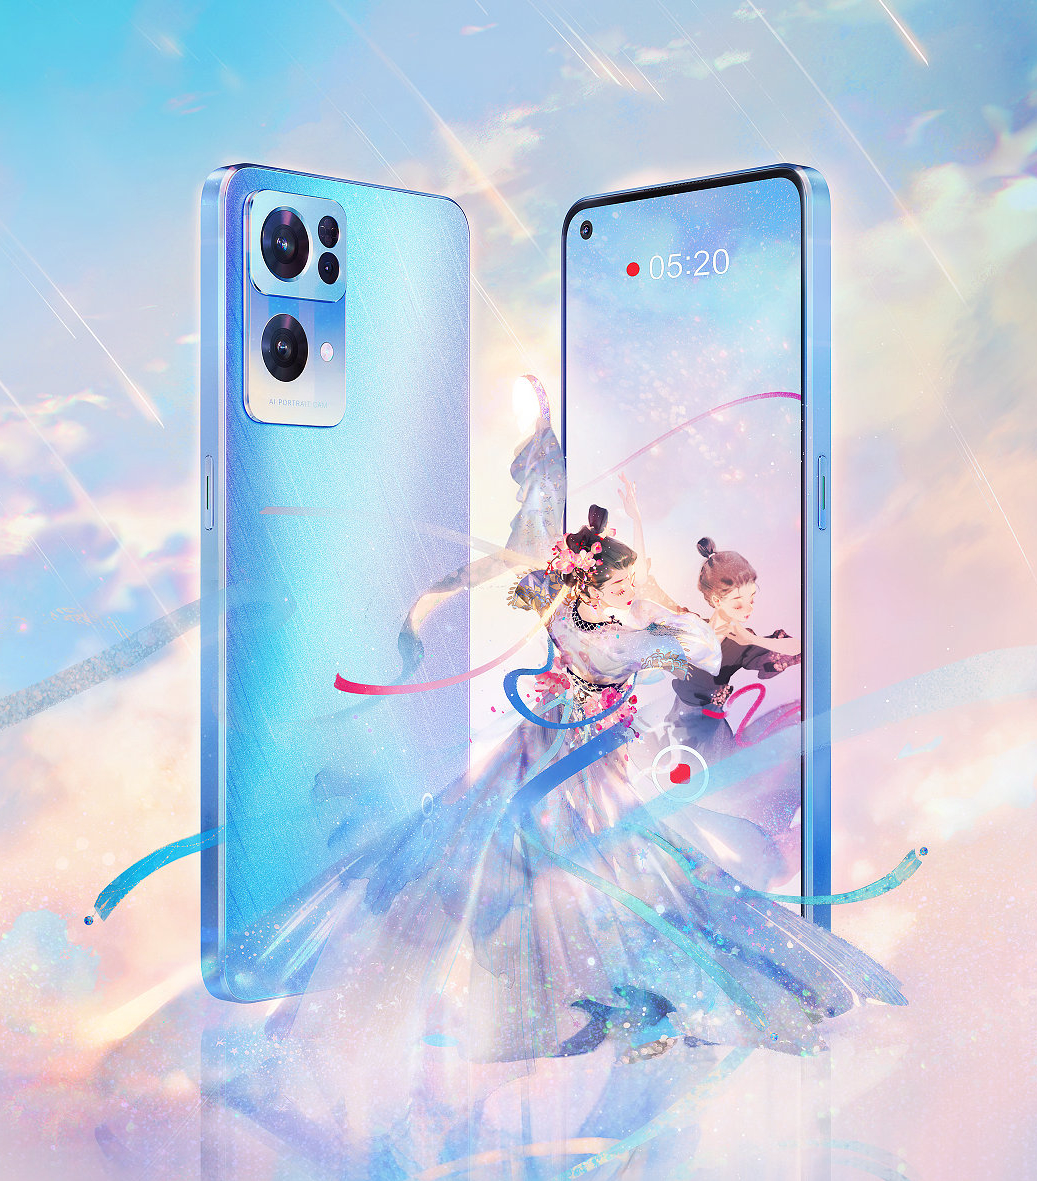 Details of OPPO Reno7 before the launch date: There are 3 versions, upgraded selfie camera with exclusive Sony sensor, priced from 9.5 million VND - Photo 5.